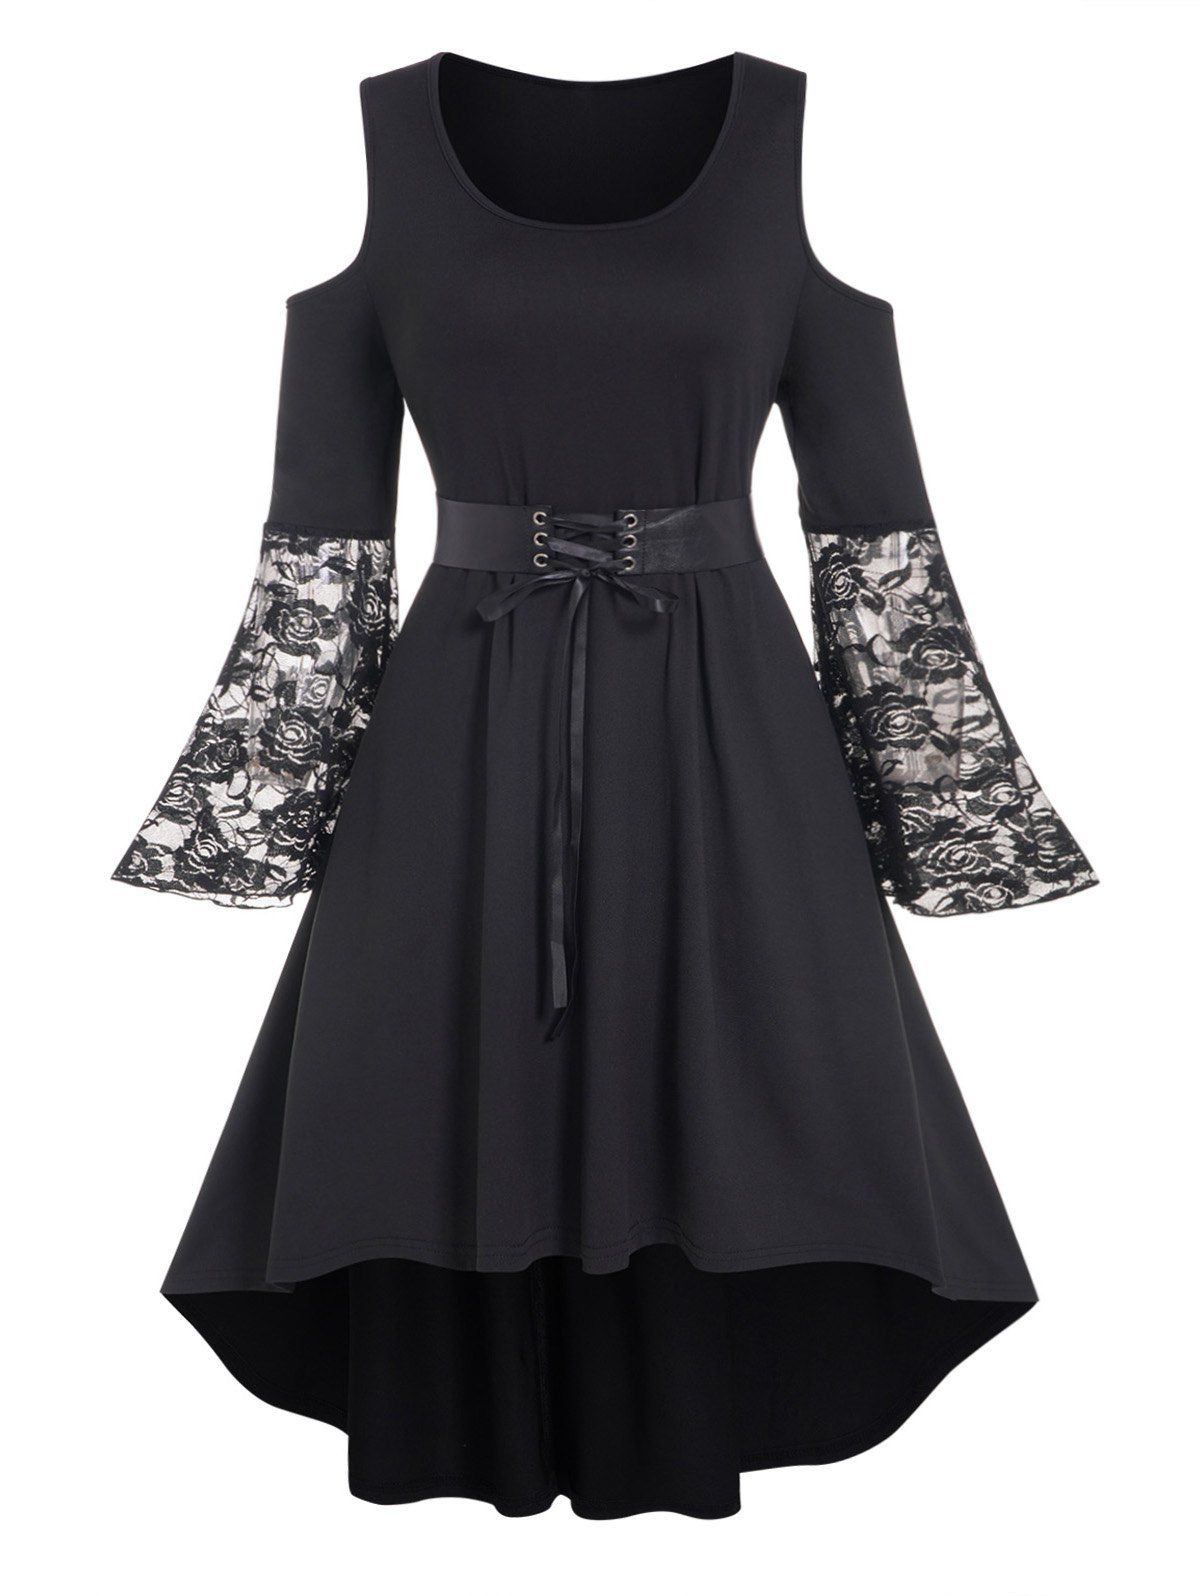 Plus Size Dress Lace Panel Flare Sleeve Lace Up High Waisted Cold Shoulder High Low Midi Dress - BLACK 3X